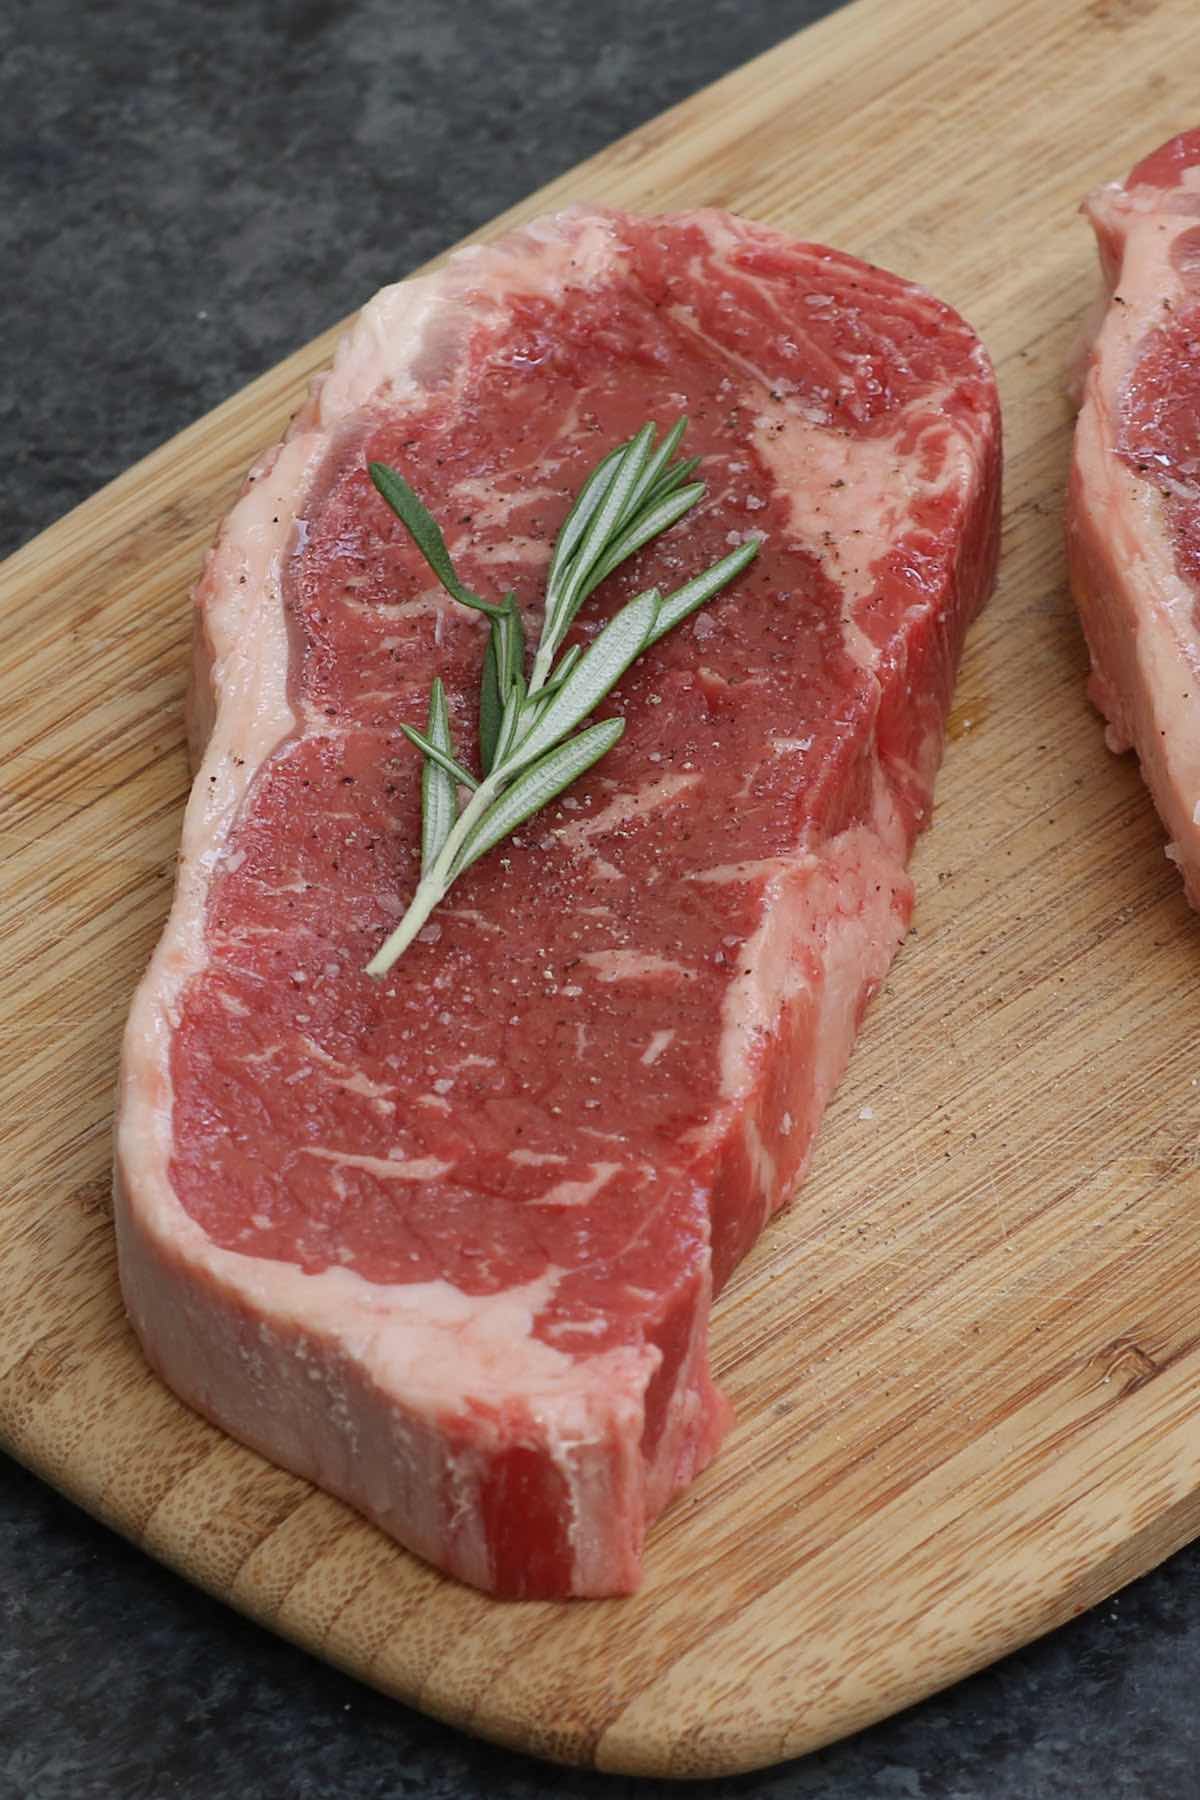 A raw striploin showing its oblong shape and the ribbon of fat along the outside